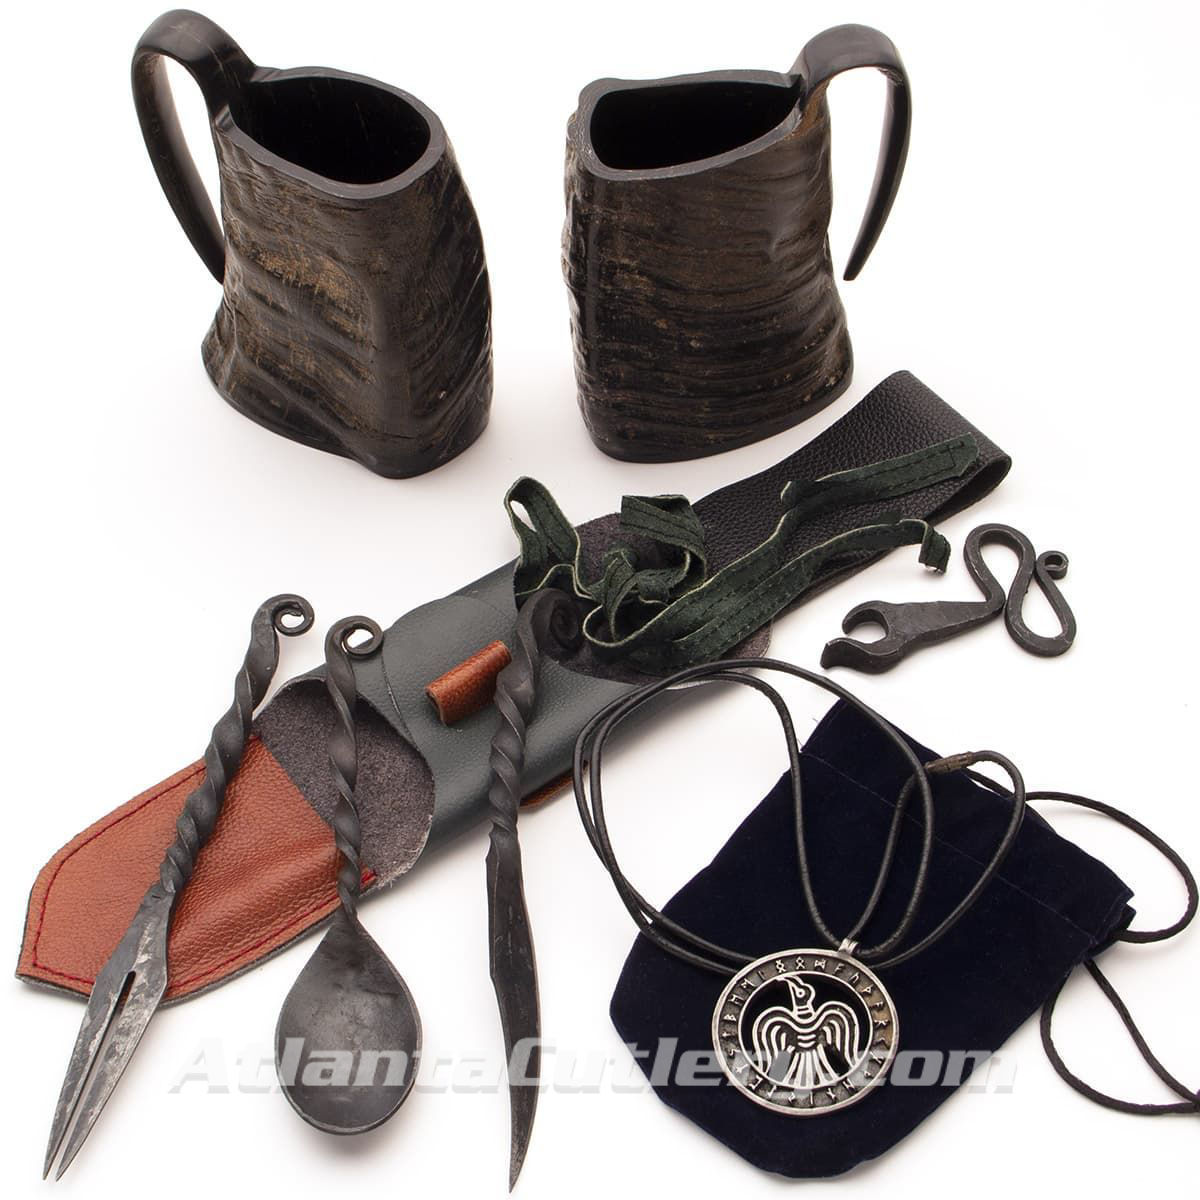 Viking Celebration Kit with 2 Horn Mugs, Feasting Utensils with Leather Belt Pouch, Iron Bottle Opener and Pewter Raven Pendant